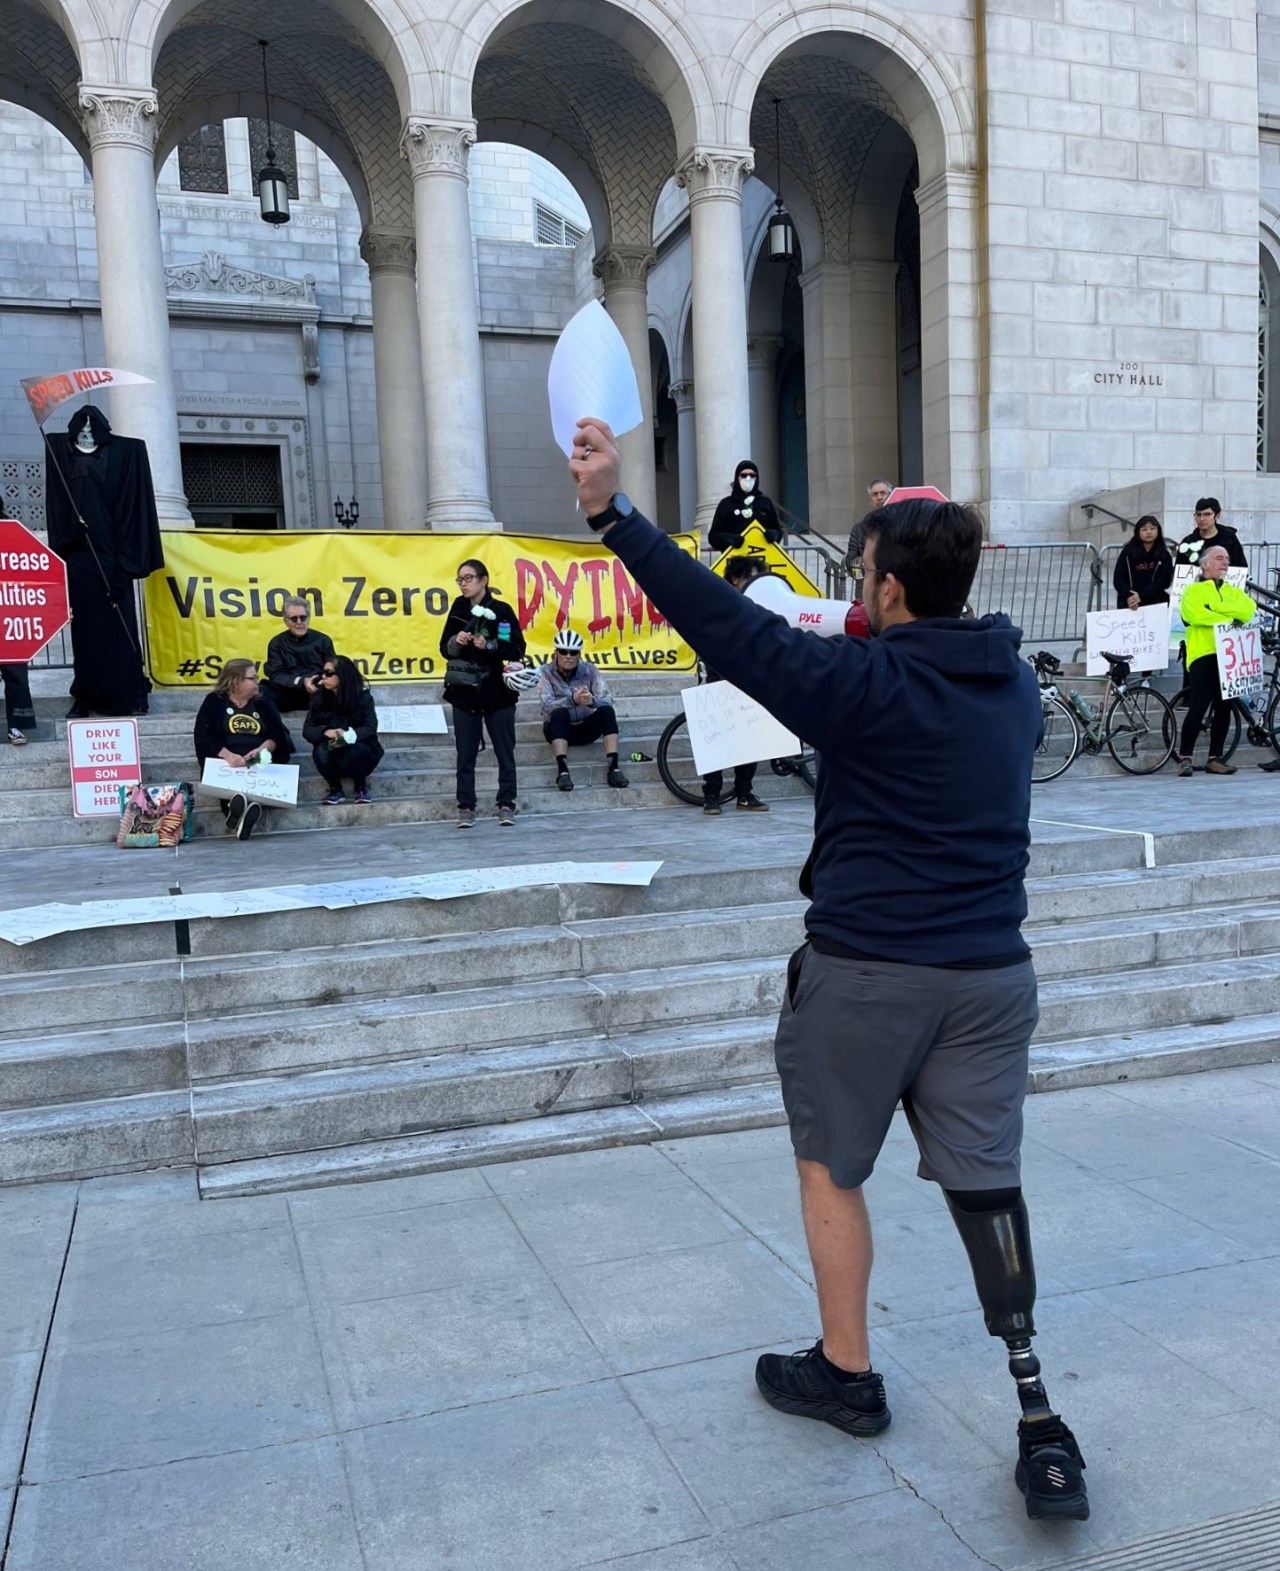 One of the main organizers behind rally (and recent report) is Damien Keavitt who lost his leg to a car crash, while he was bicycling in Griffith Park